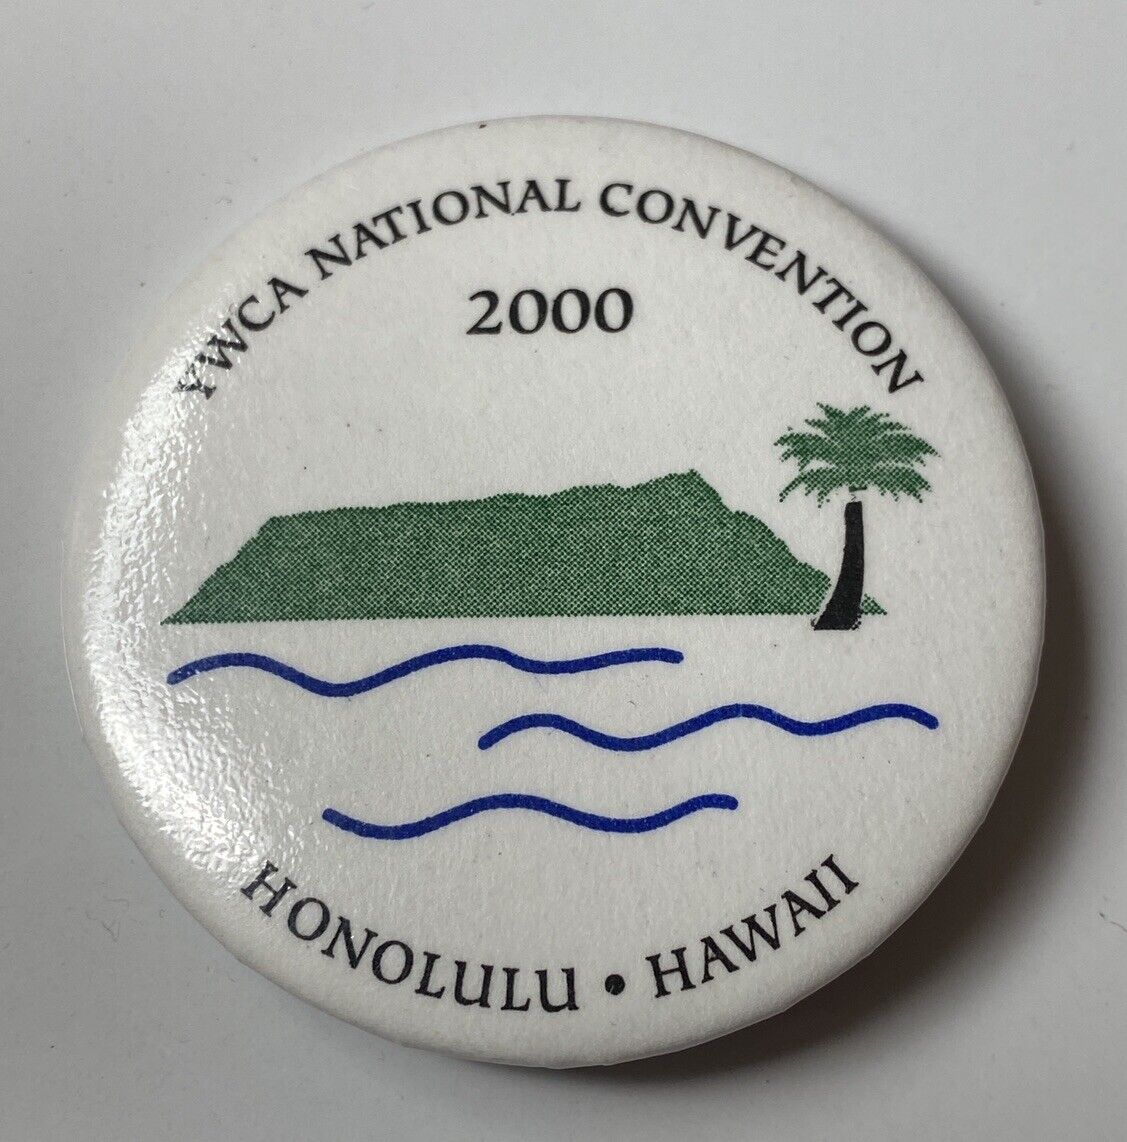 Vintage YWCA Button Pin back Hawaii Convention 2000